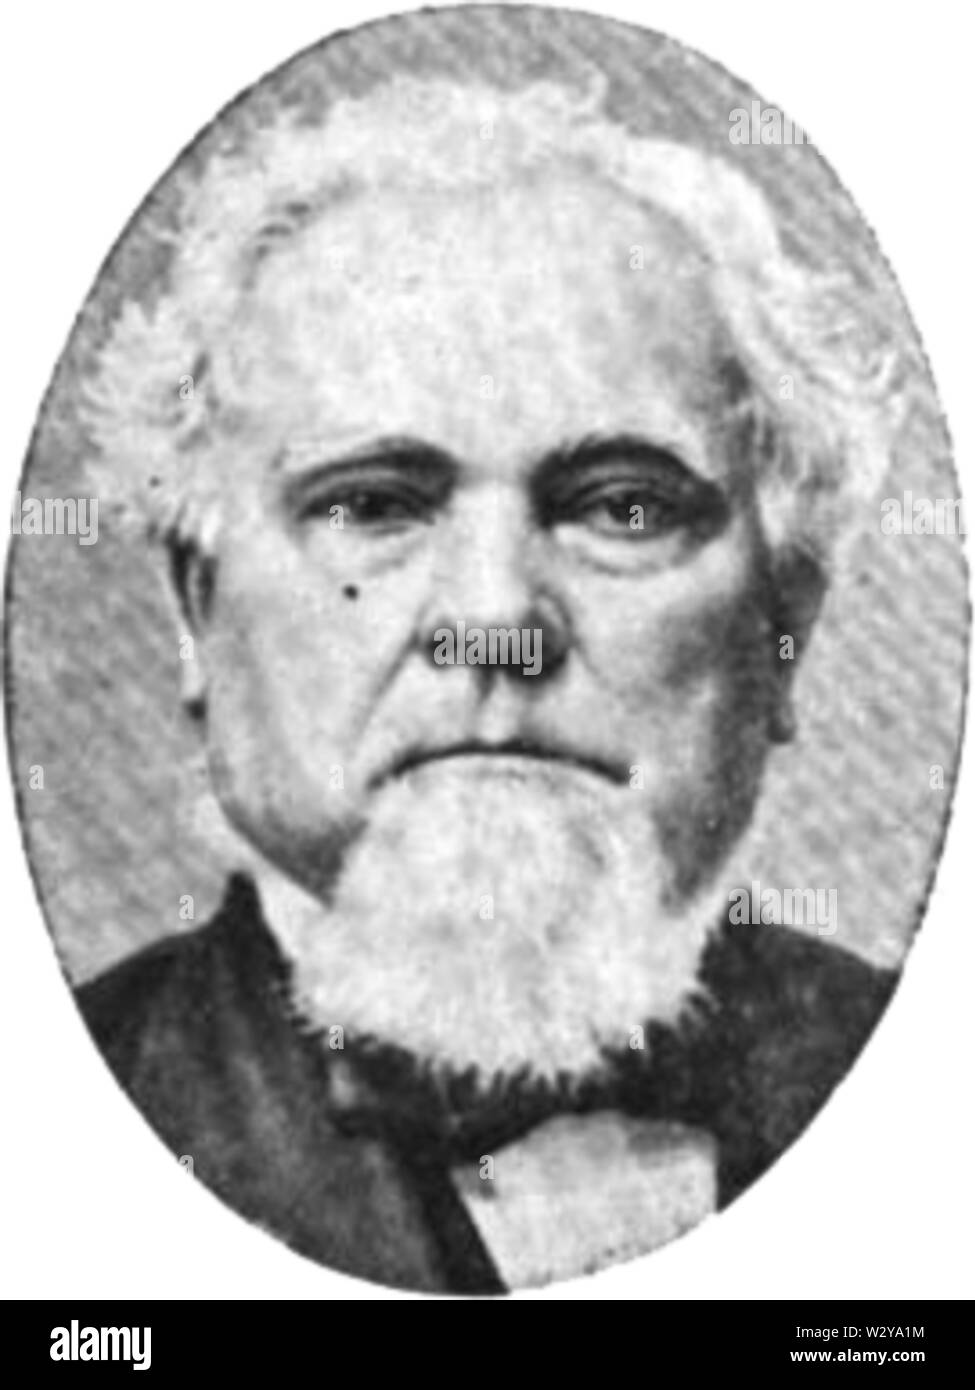 portrait of Michael Burns (1813-1896), as it appears in Notable Men of Tennessee, edited by Judge John Allison, Southern Historical Association, Atlanta, Georgia, 1905, volume I, p. 77, as hosted at https://archive.org/stream/bub gb Fag-AAAAYAAJ#page/n73/mode/2up Book is in the public domain as having been published in the United States before 1923. Stock Photo